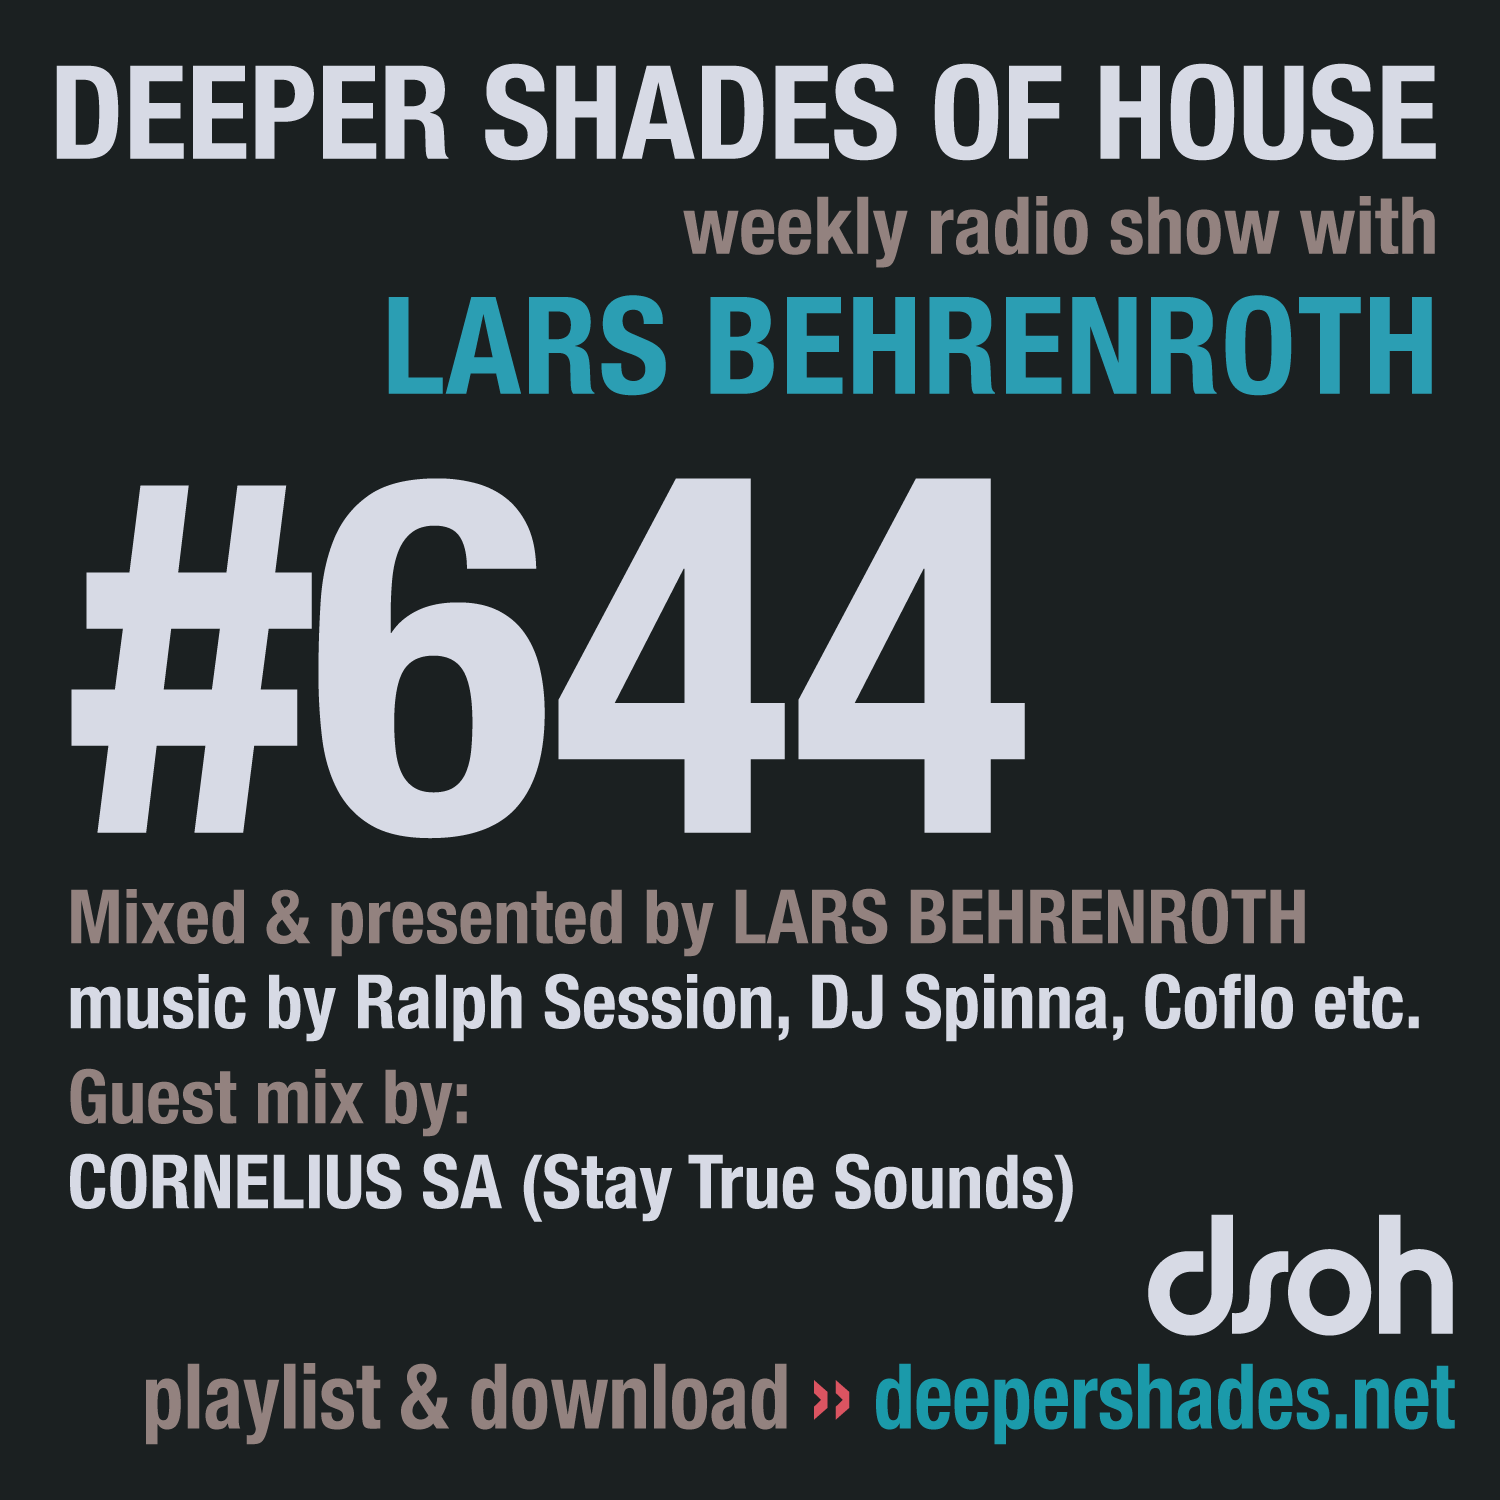 Deeper Shades Of House 644